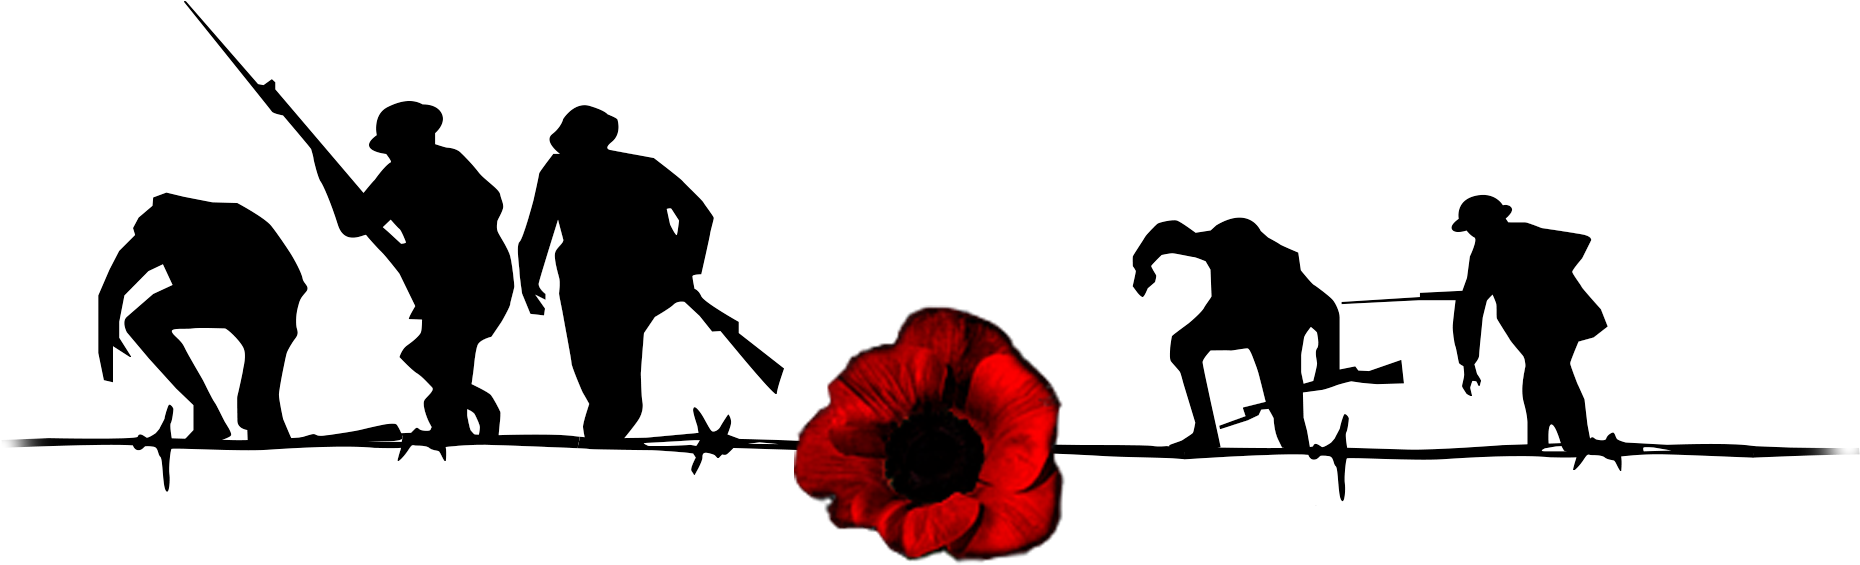 For Help And Advice Please Post In The Steam Workshop - First World War Silhouettes (1859x632)